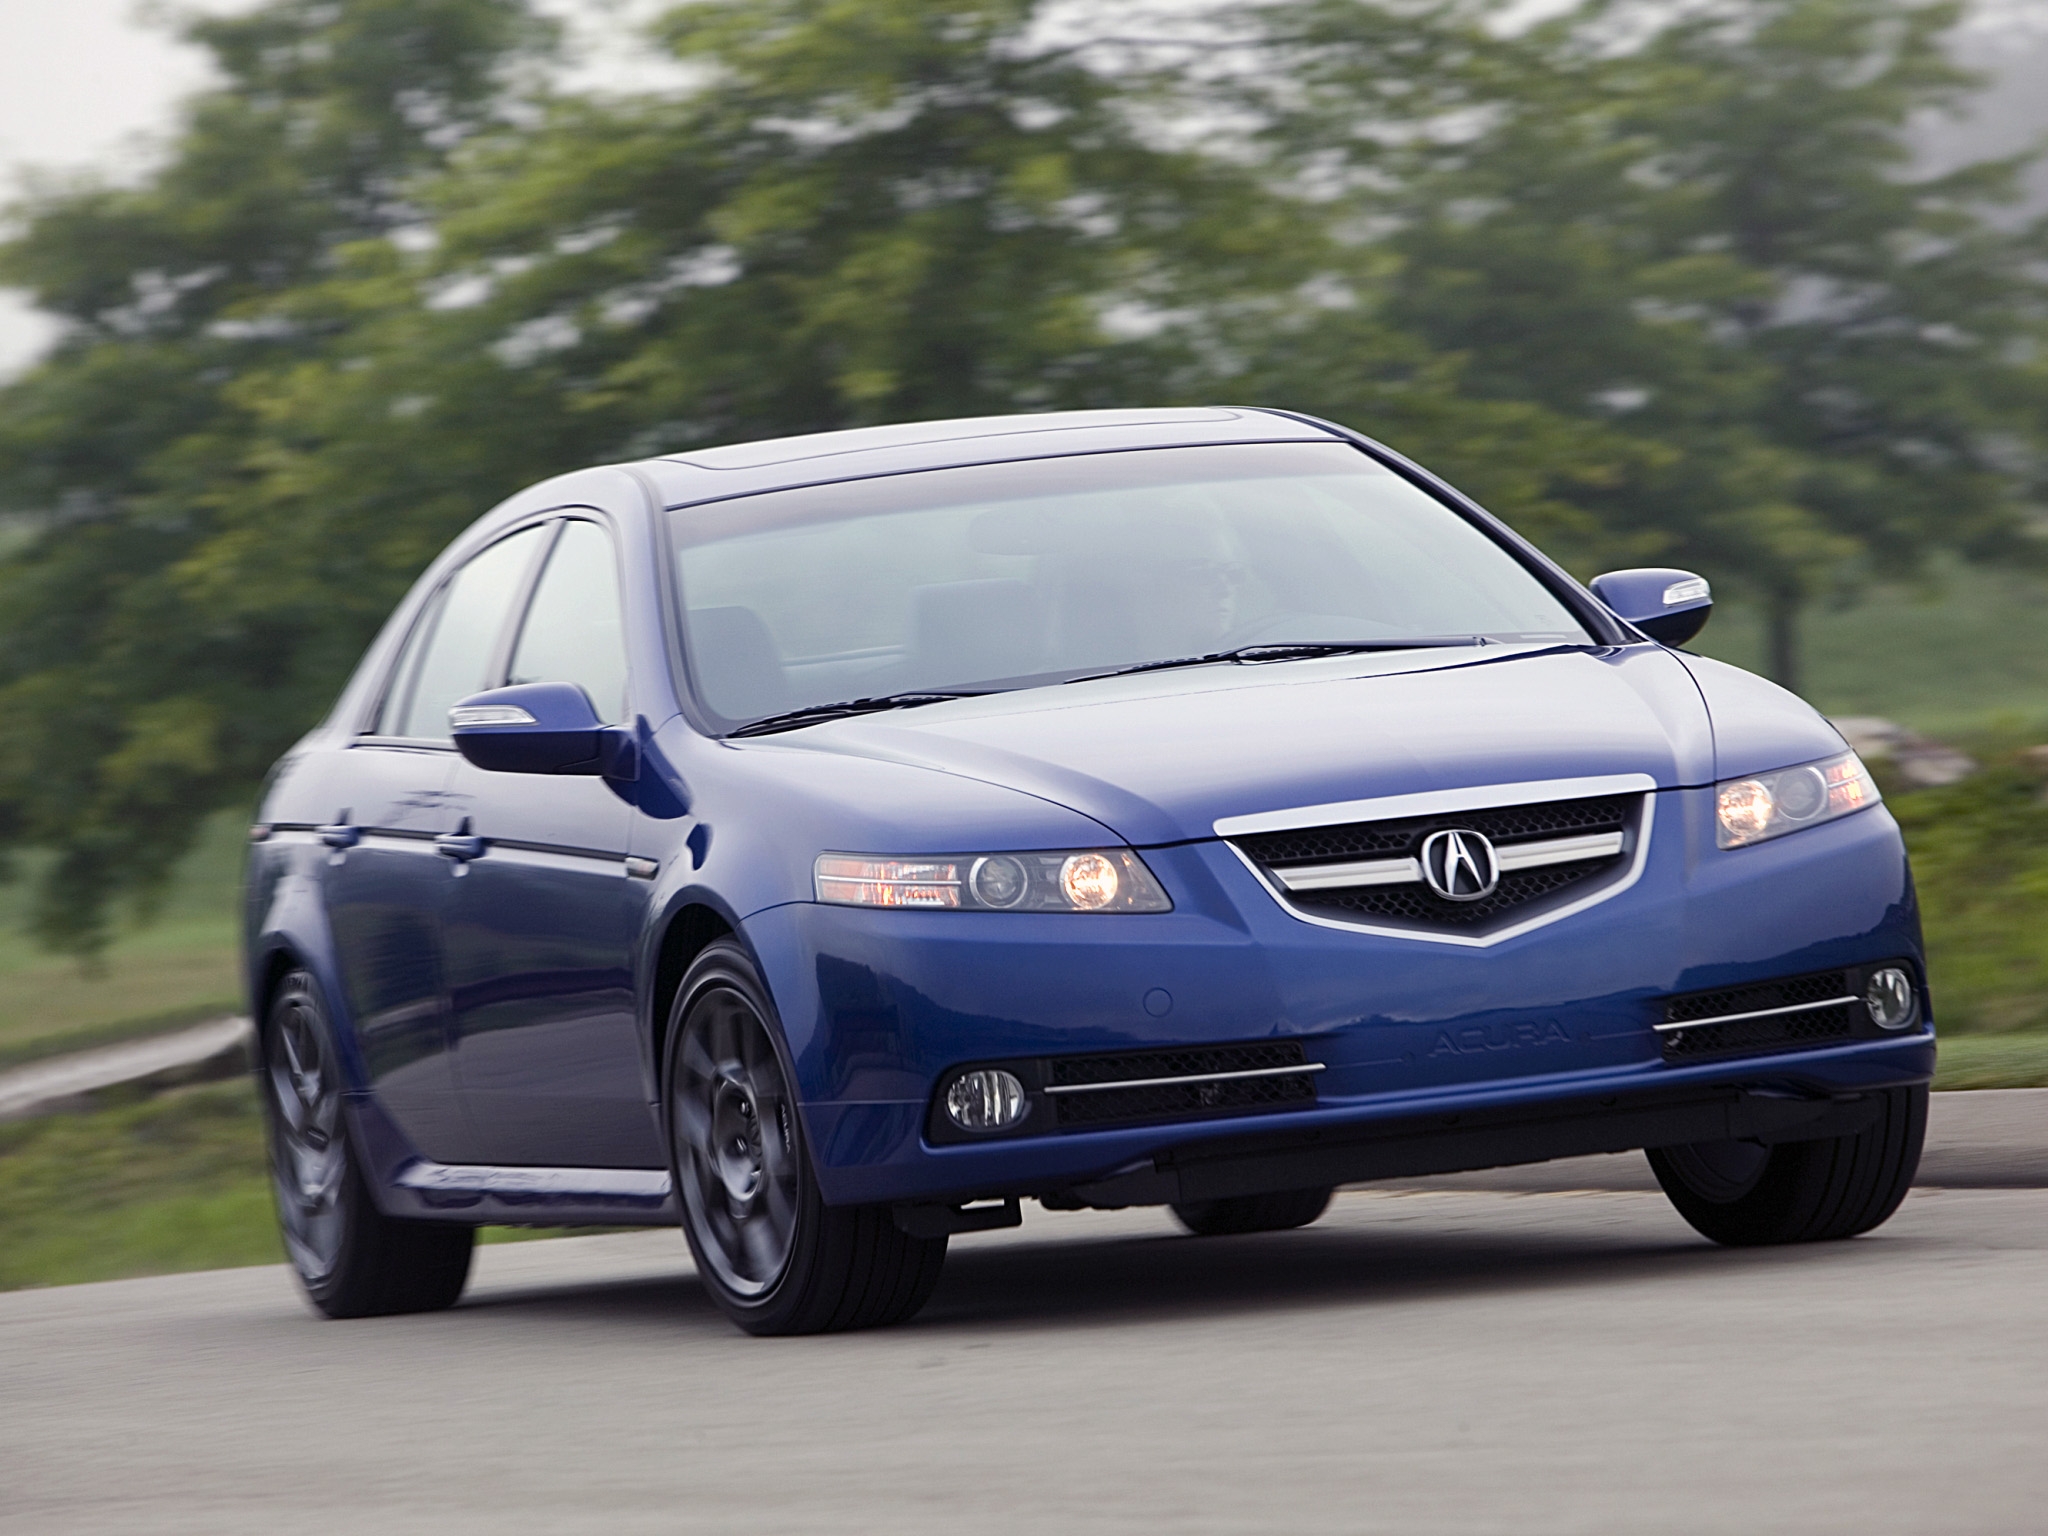 Windows Backgrounds auto, trees, grass, acura, cars, blue, asphalt, front view, speed, style, akura, tl, 2007